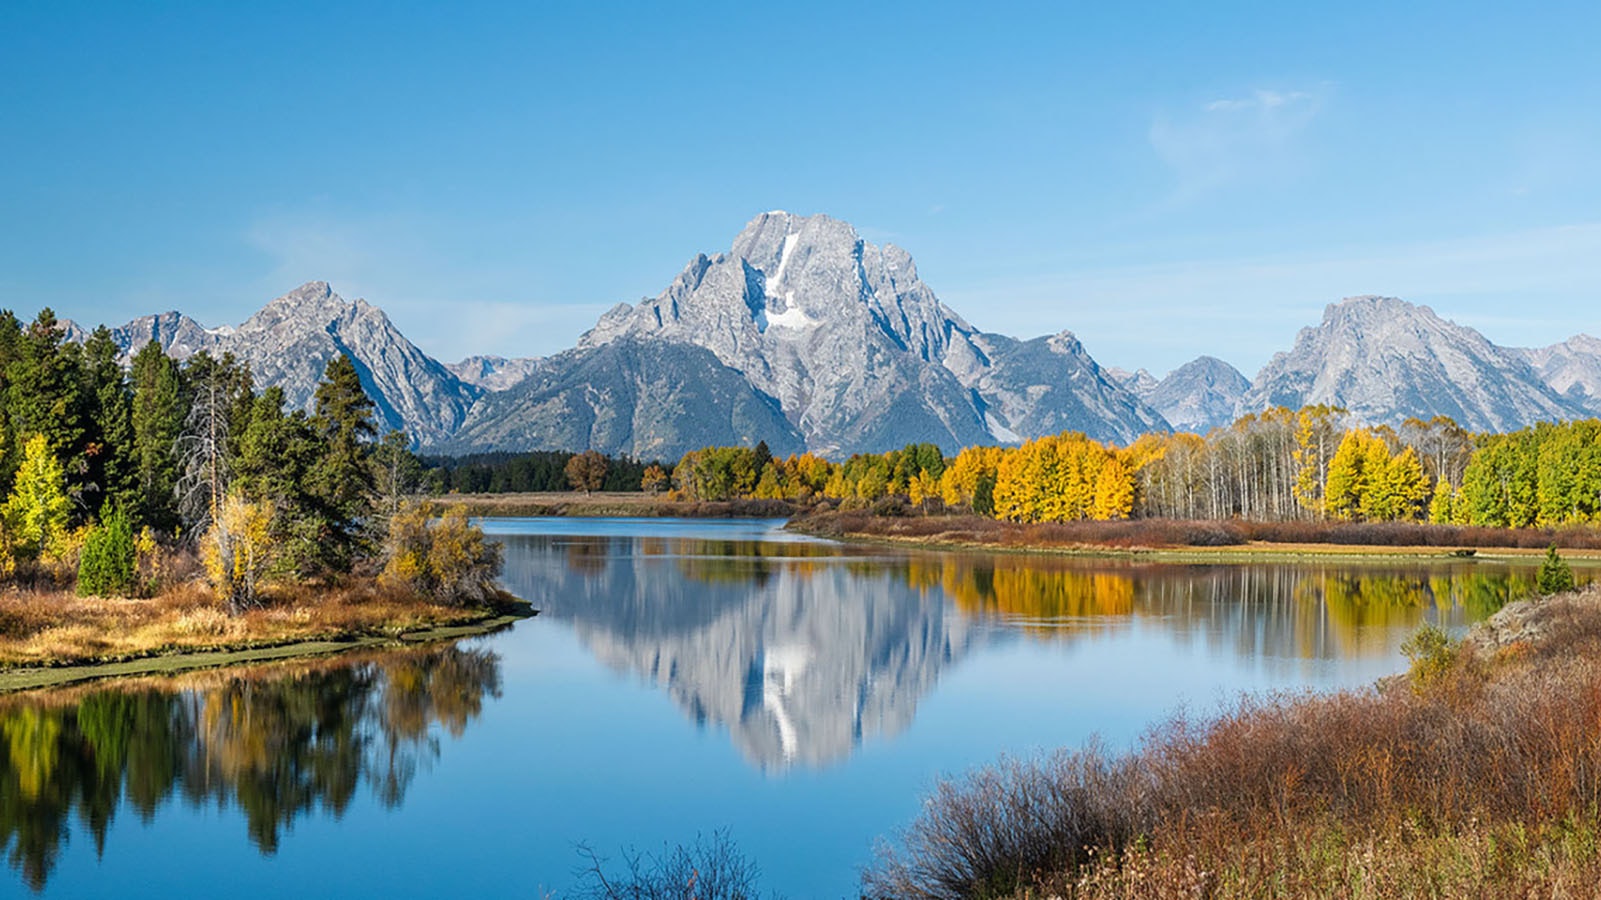 Oxbow Bend of the Snake River reflecting Mount Moran is a favorite spot for photographers to get shots of Wyoming's fall colors.